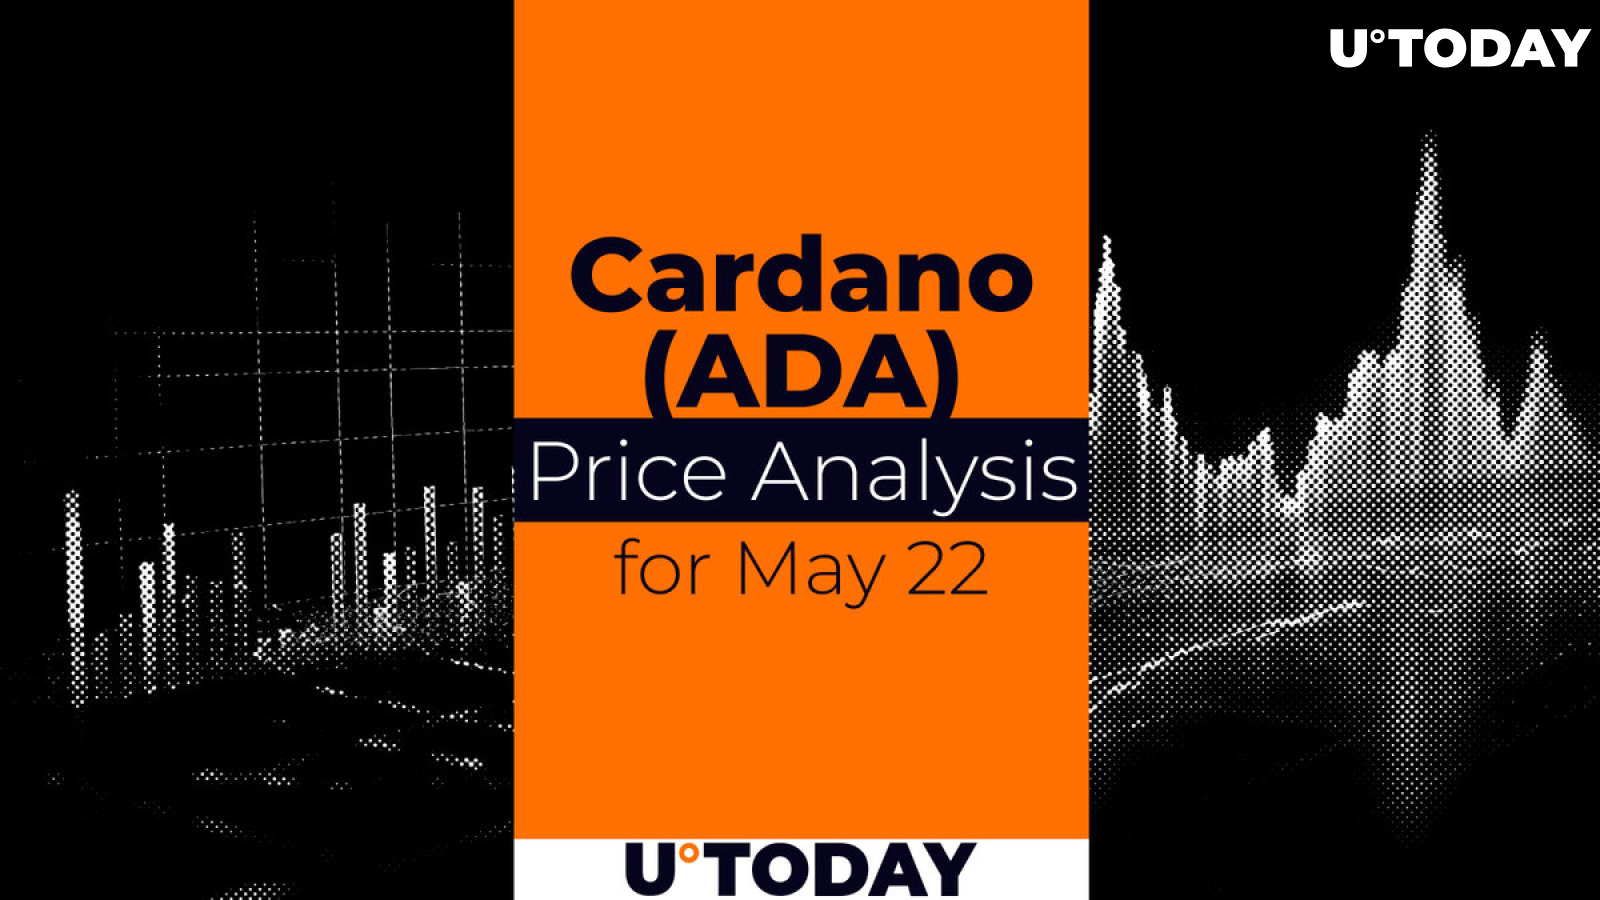 Cardano (ADA) Price Prediction for May 22